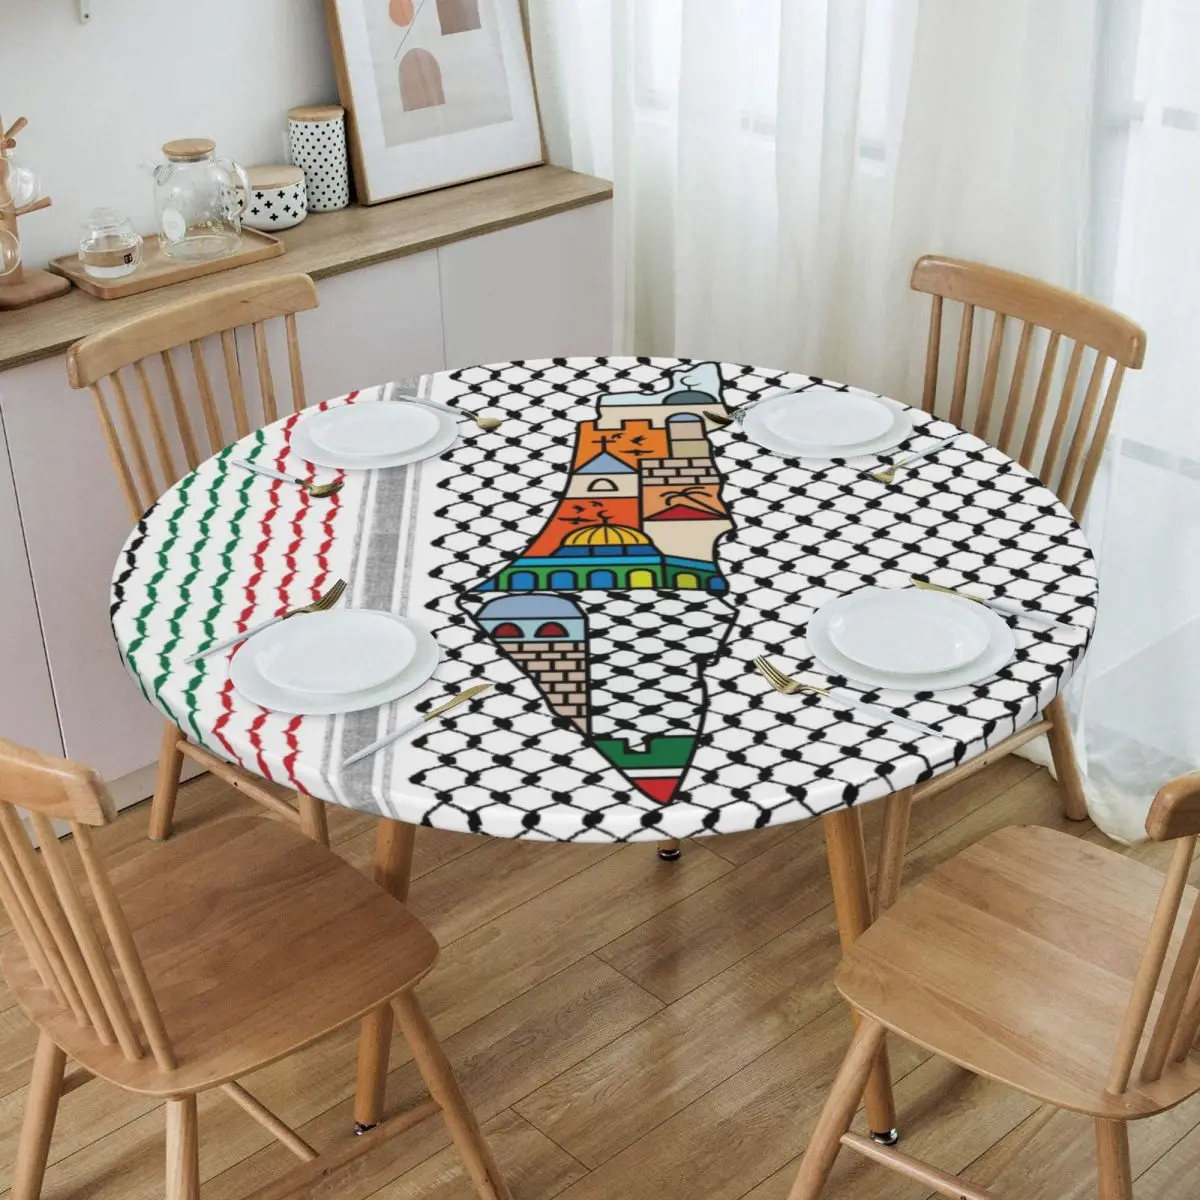 

Palestine Palestinian Map With Kufiya Hatta Pattern Table Cover Fitted Jerusalem Table Cloth Backing Edge Tablecloth for Dining